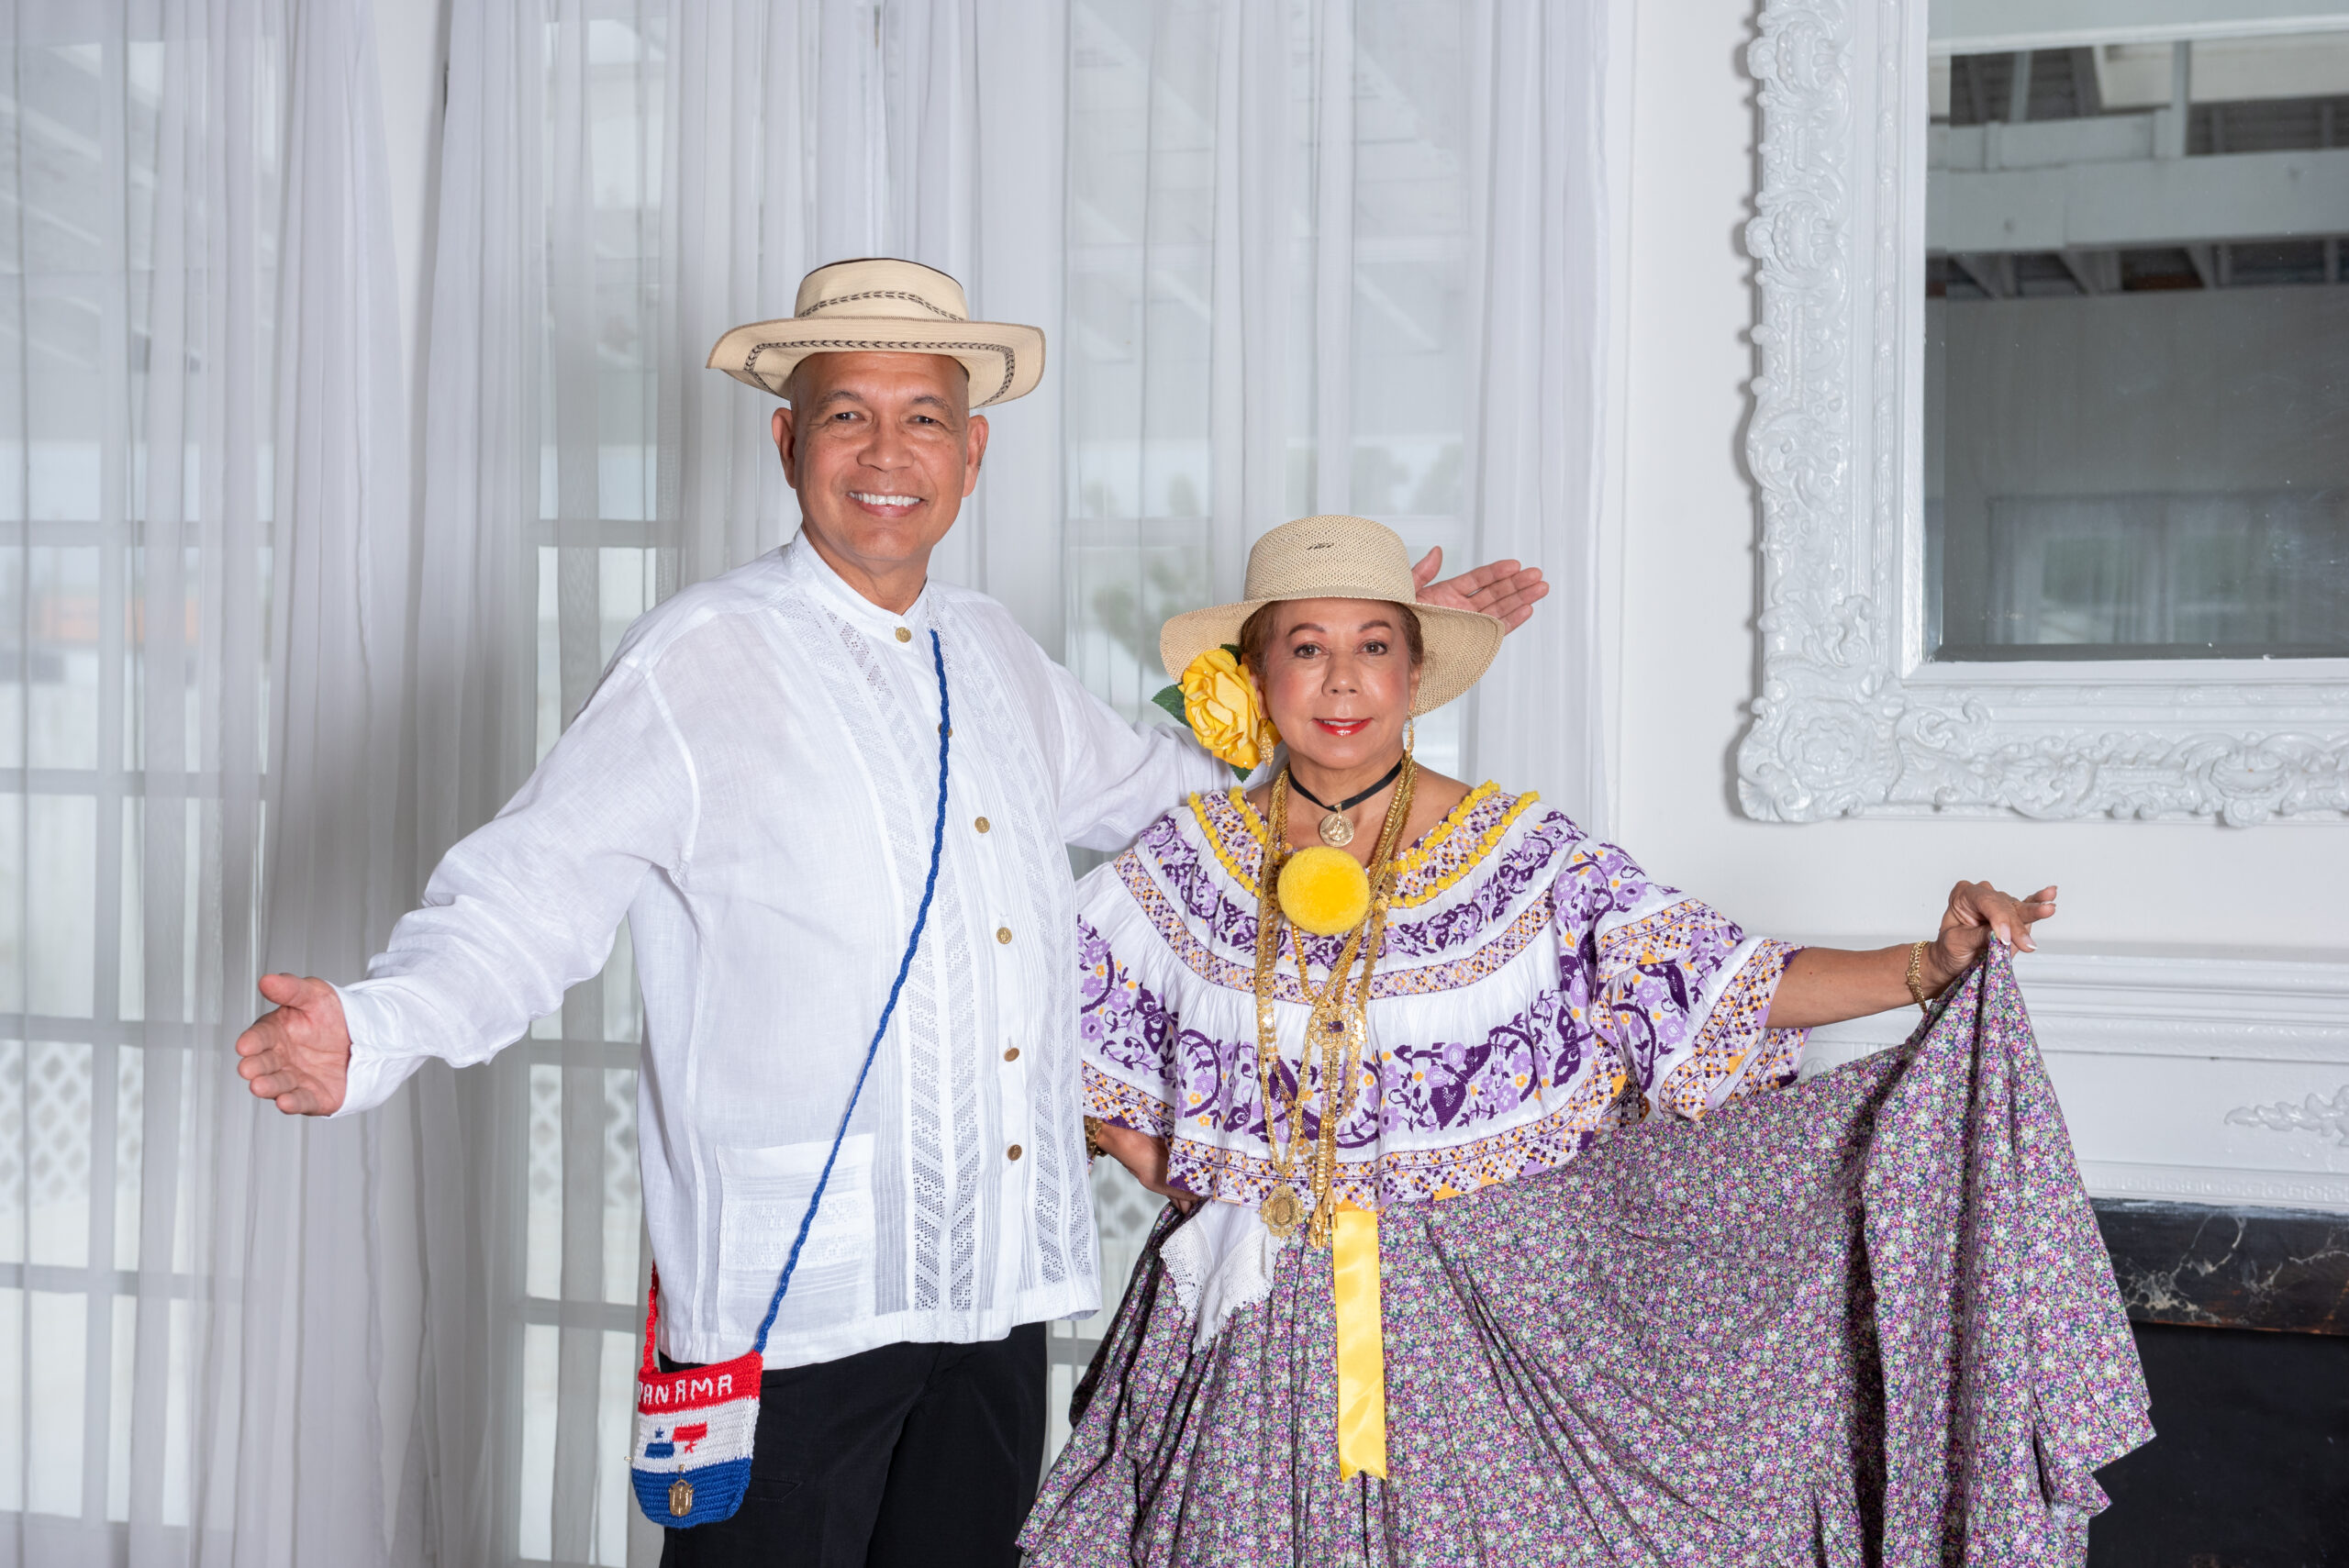 A man in a white shirt and straw hat poses with a woman in a purple and white embroidered dress and a straw hat.